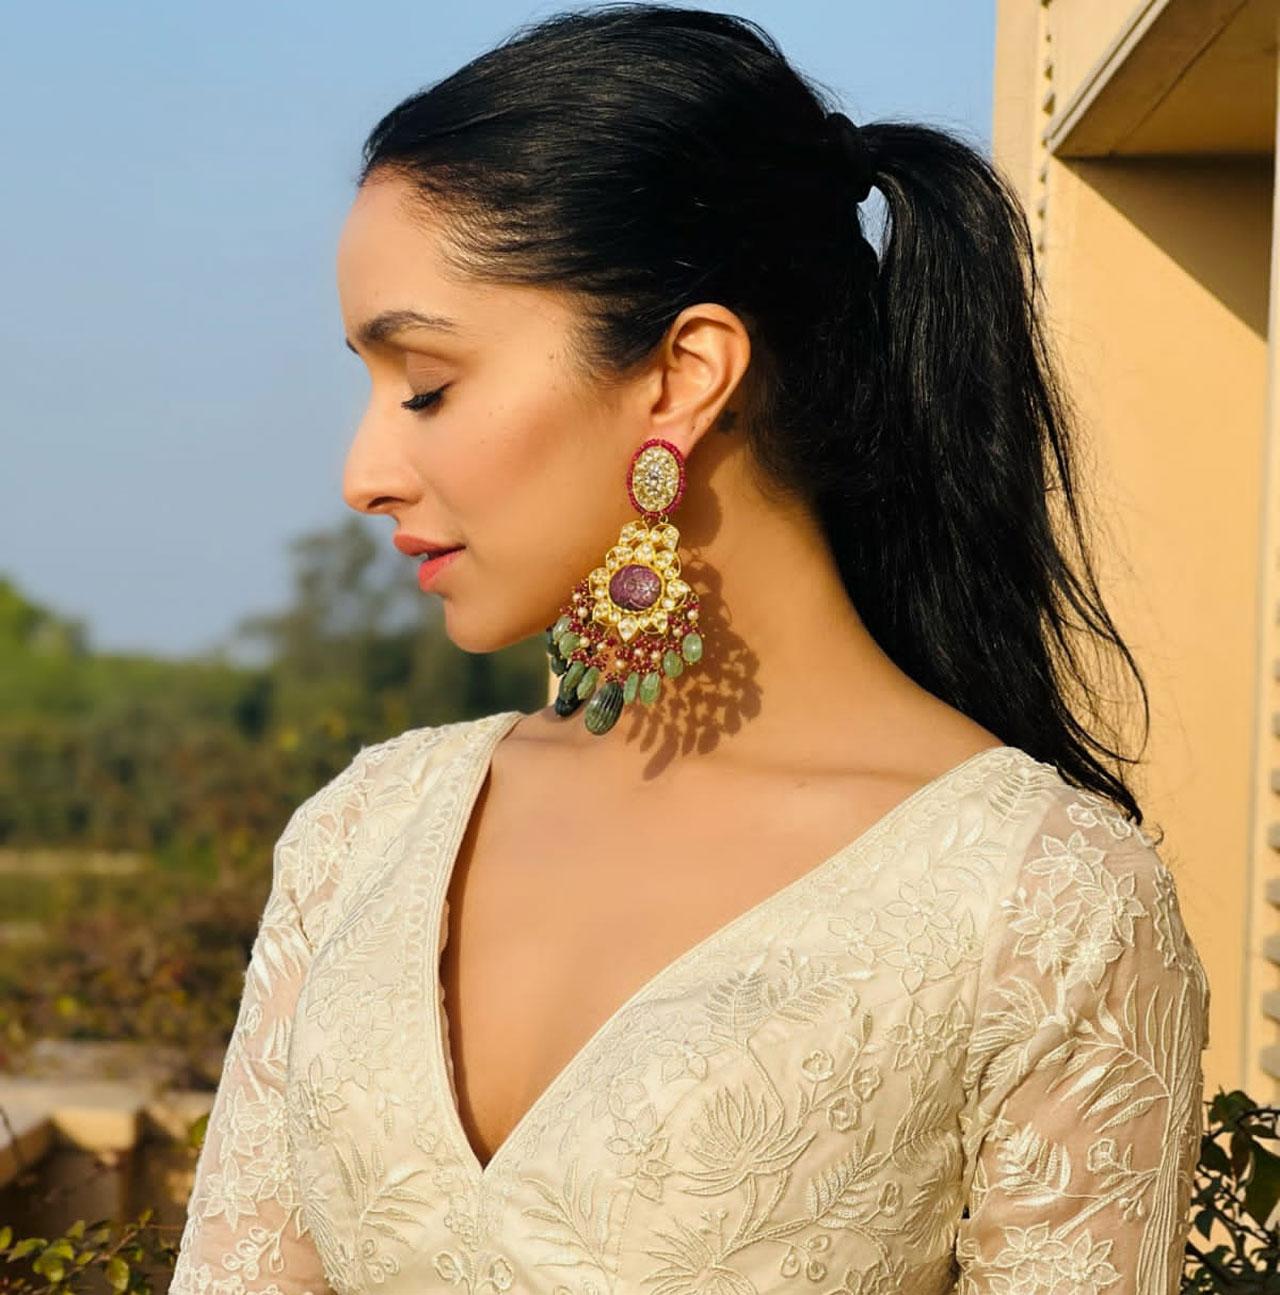 Shraddha Kapoor never fails to impress us with her sartorial choices. The ever-beautiful Shraddha Kapoor can rock any style with utmost grace and oomph. That's exactly what she did recently on Instagram.